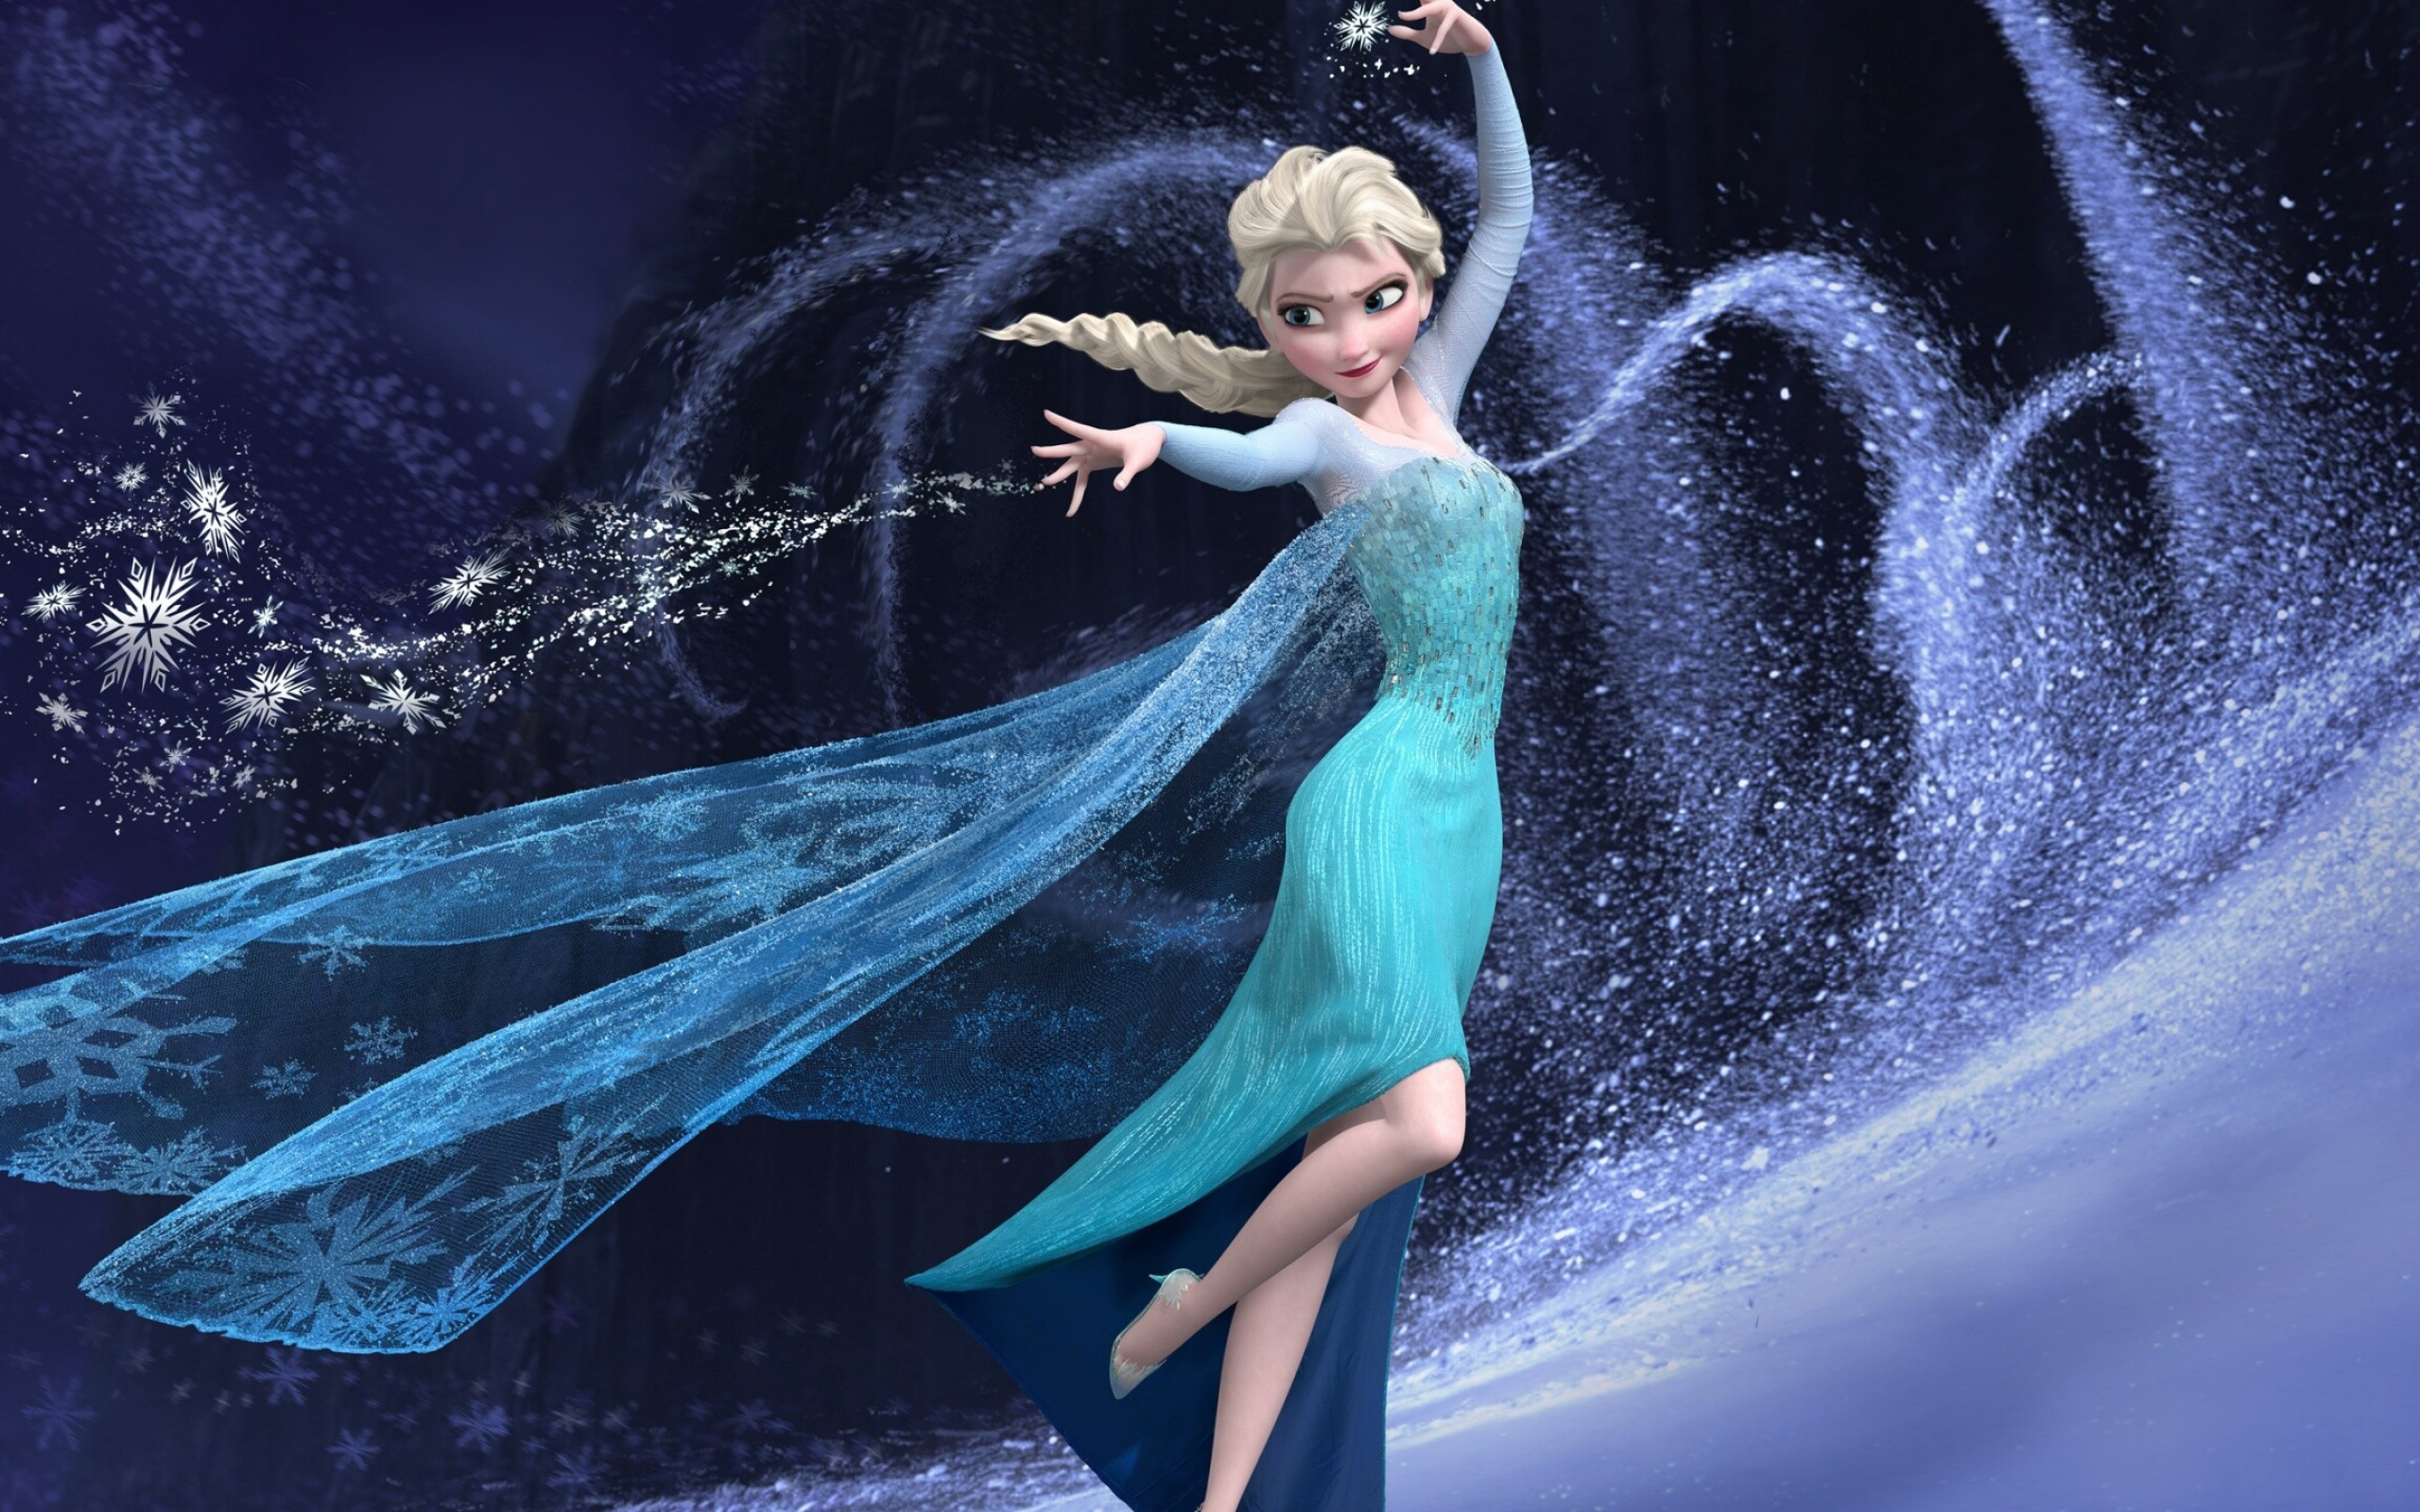 Frozen: Received two awards at the 86th Academy Awards, and numerous other accolades, Disney. 2560x1600 HD Wallpaper.